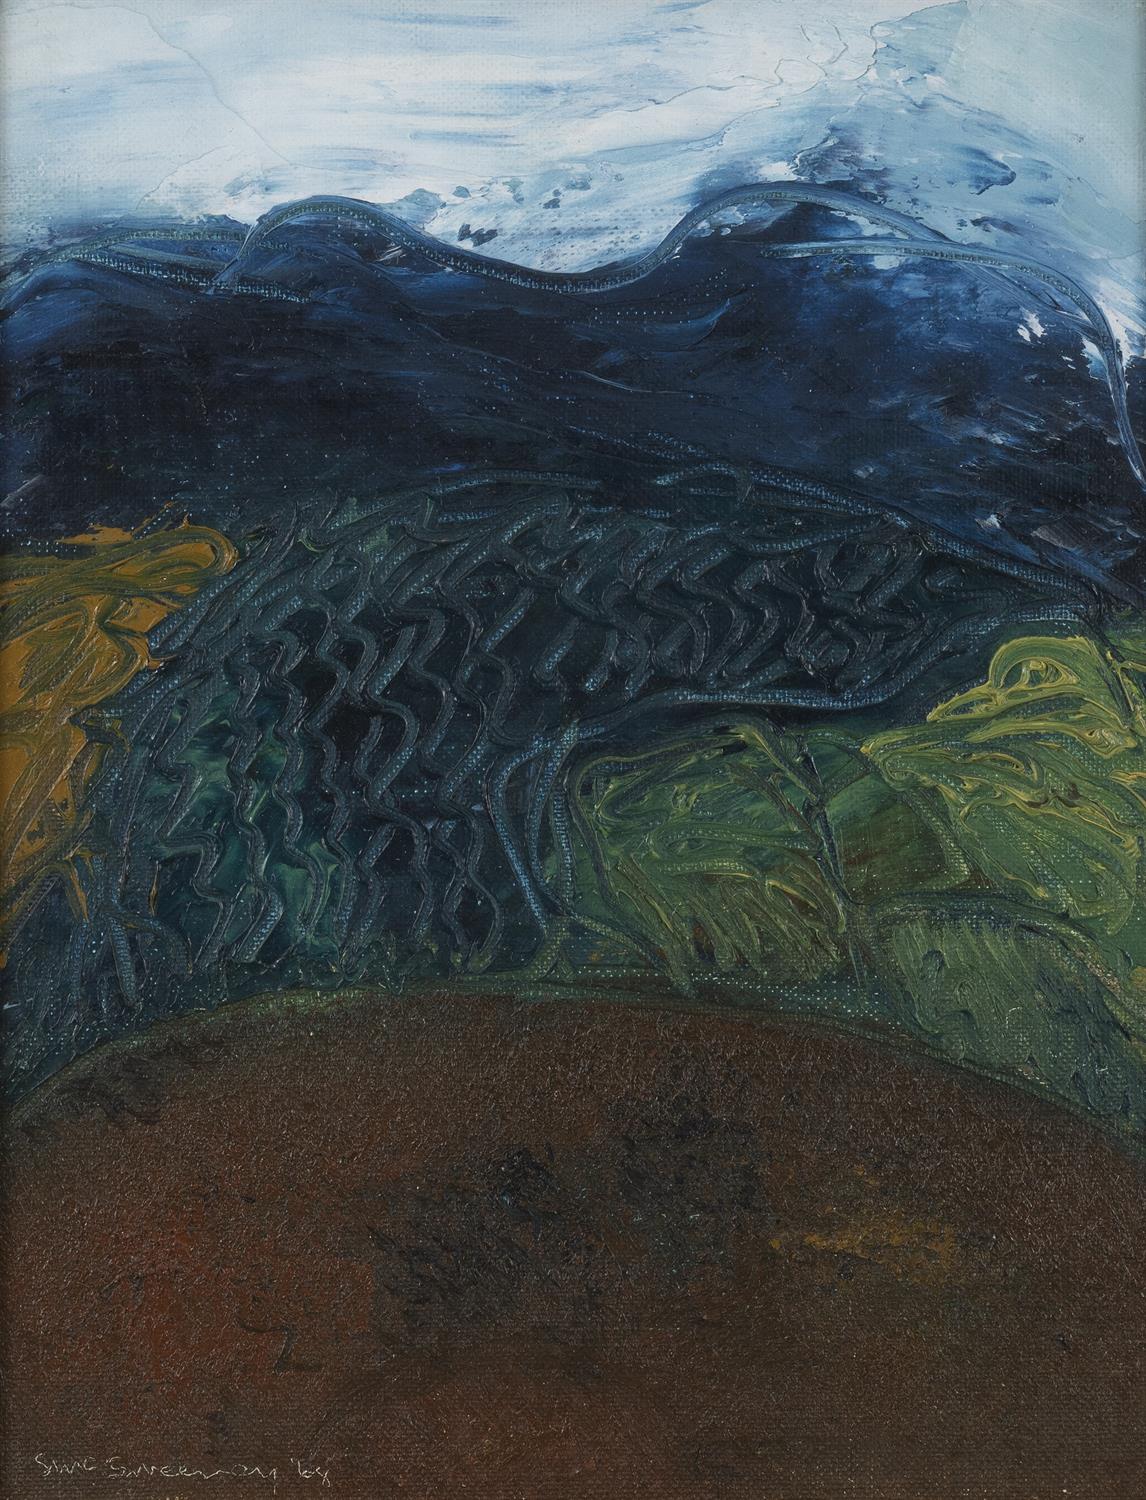 Seán McSweeney HRHA (1935-2018) Landscape Oil on canvas, 25 x 20cm Signed and dated (19)'86